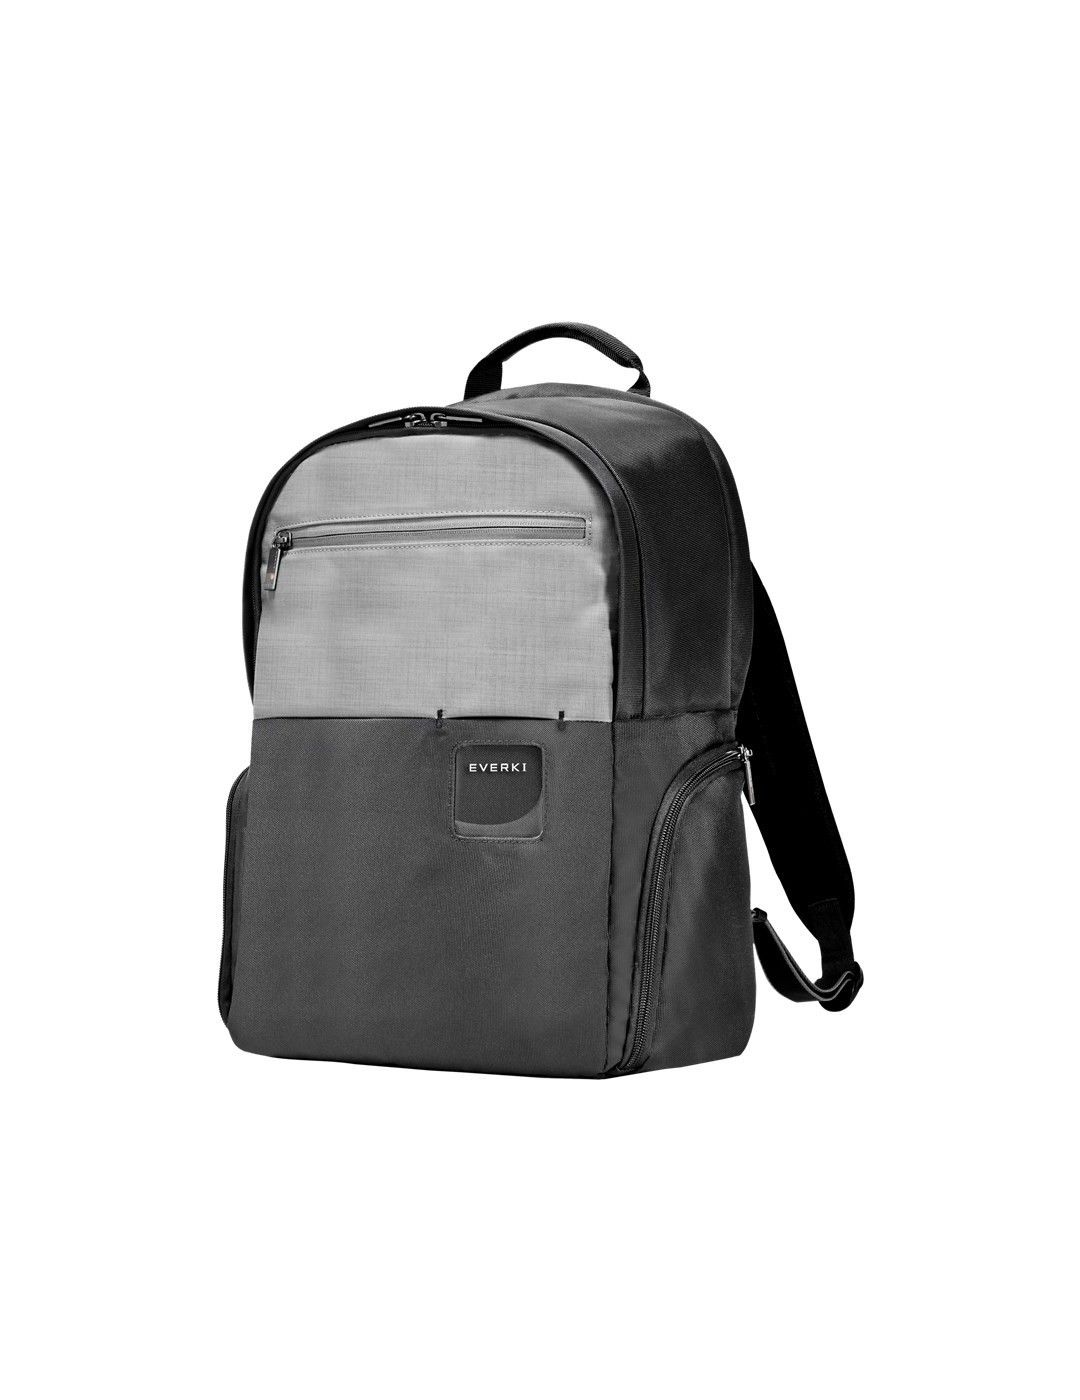 Laptop backpack ContemPRO Everki 15.6 inches